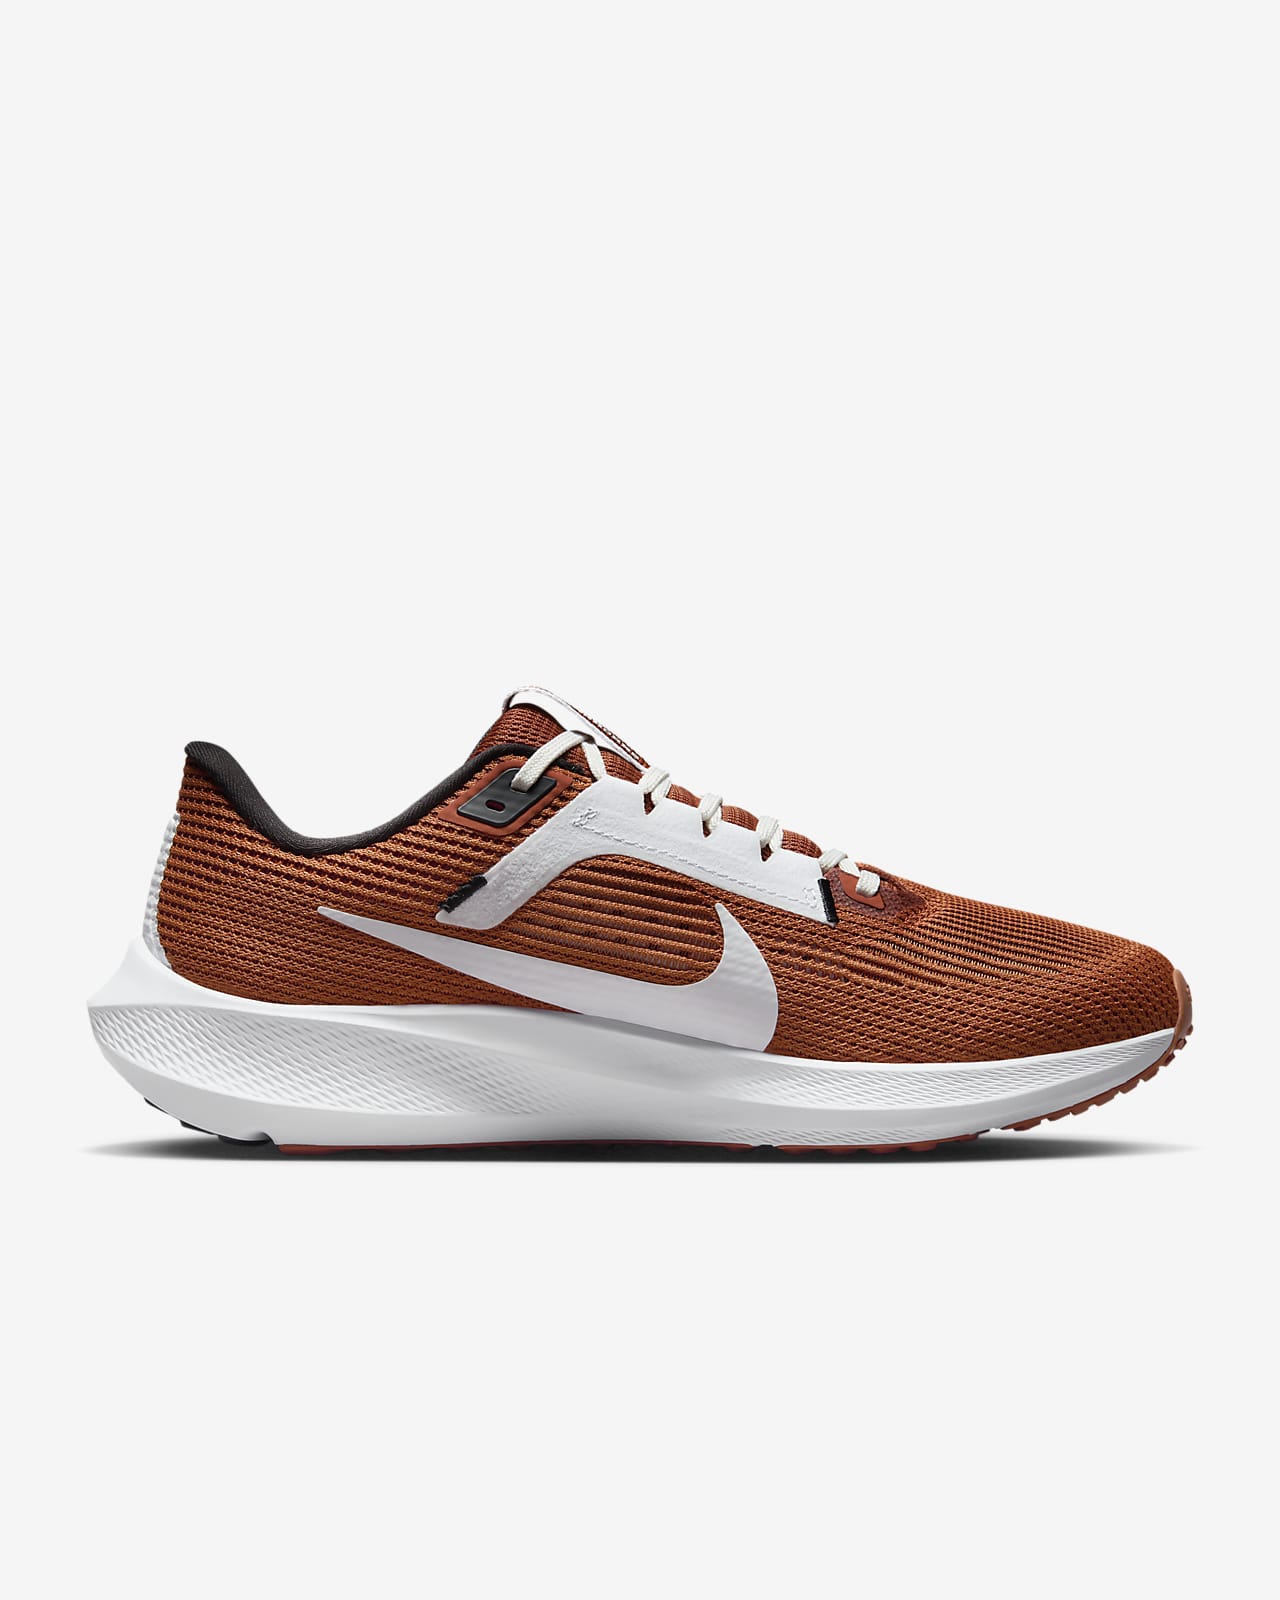 Nike College Air Max SYSTM (Texas) Men's Shoes.